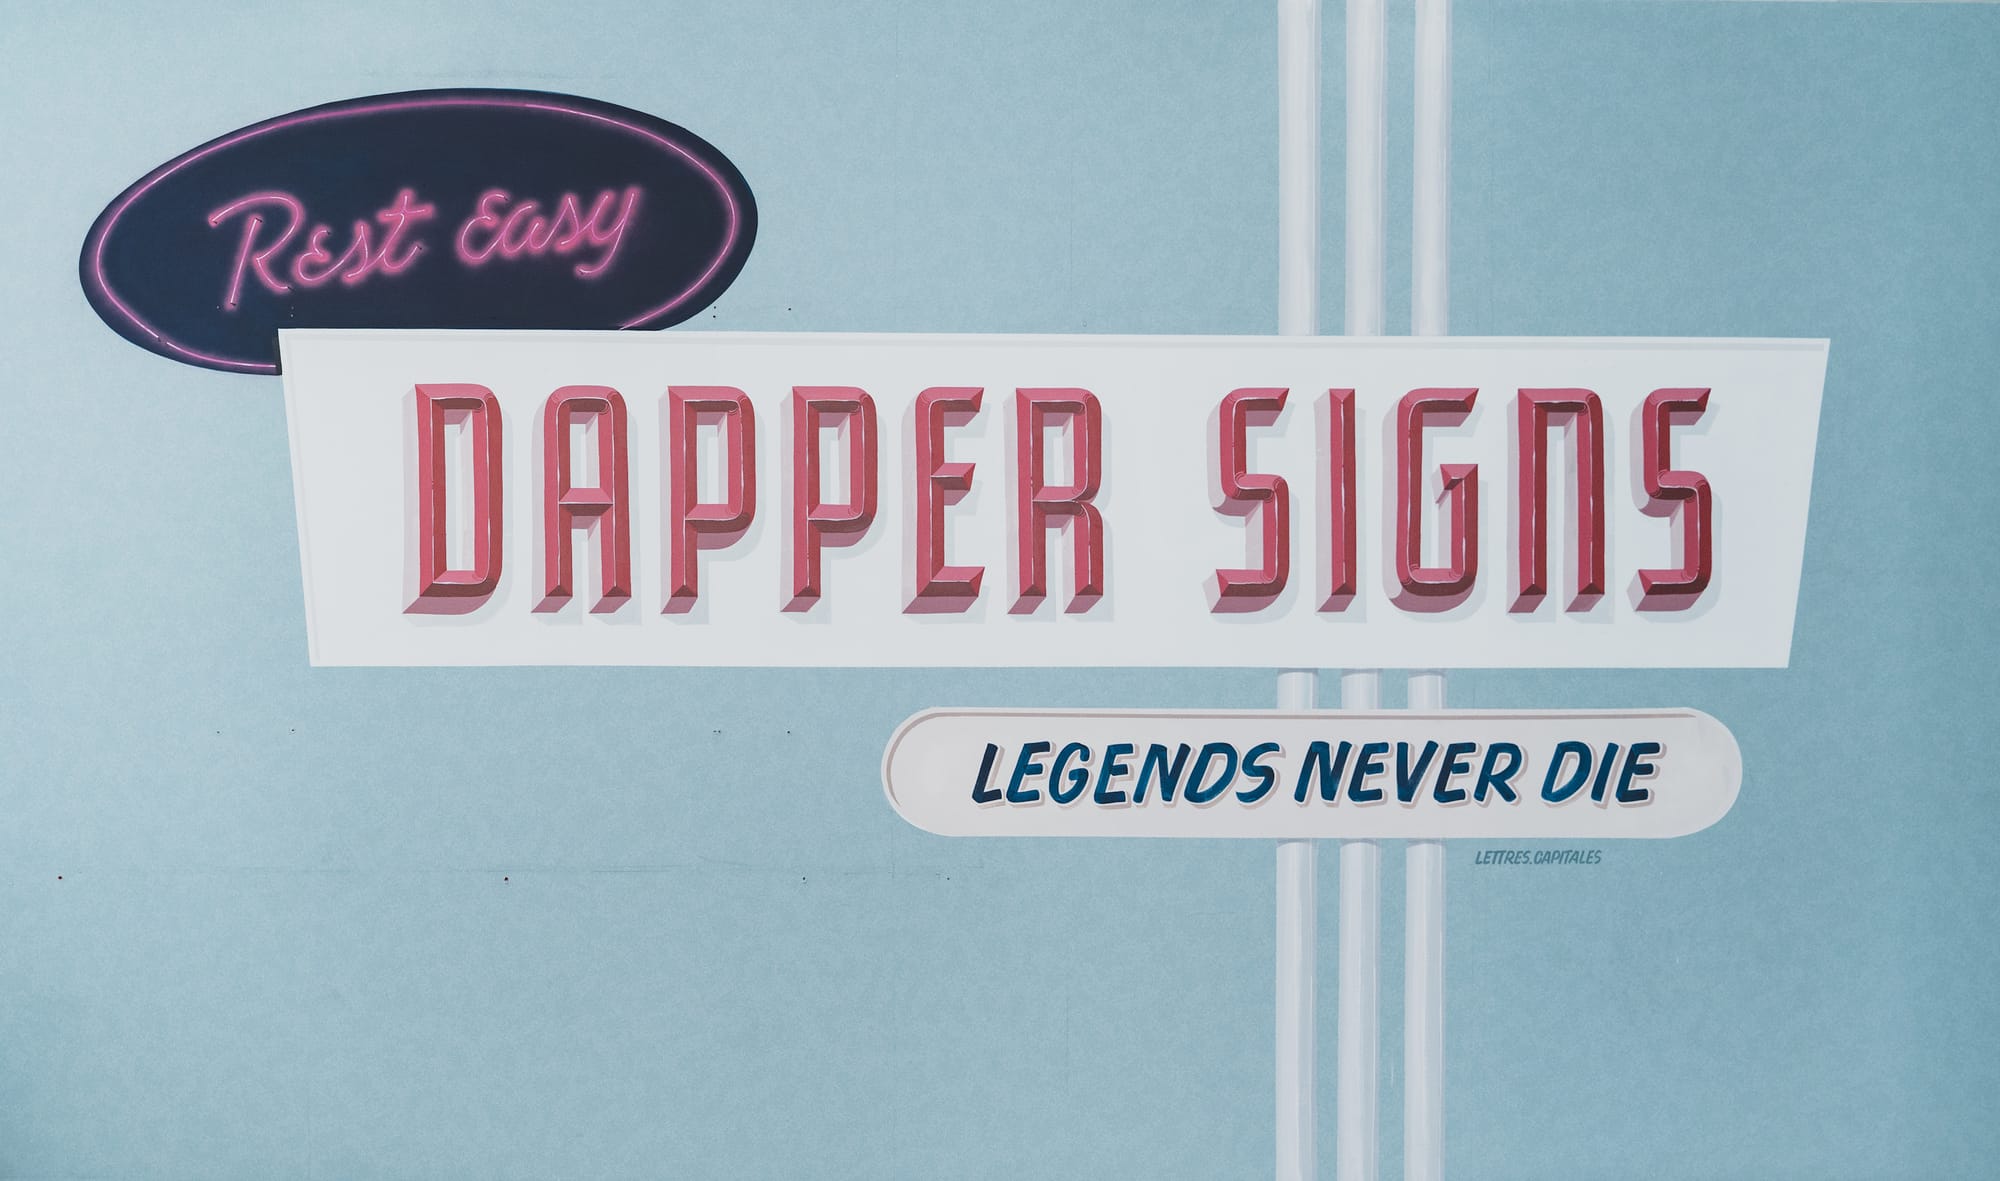 Hand-painted mural that reads "Rest Easy. Dapper Signs. Legends Never Die".